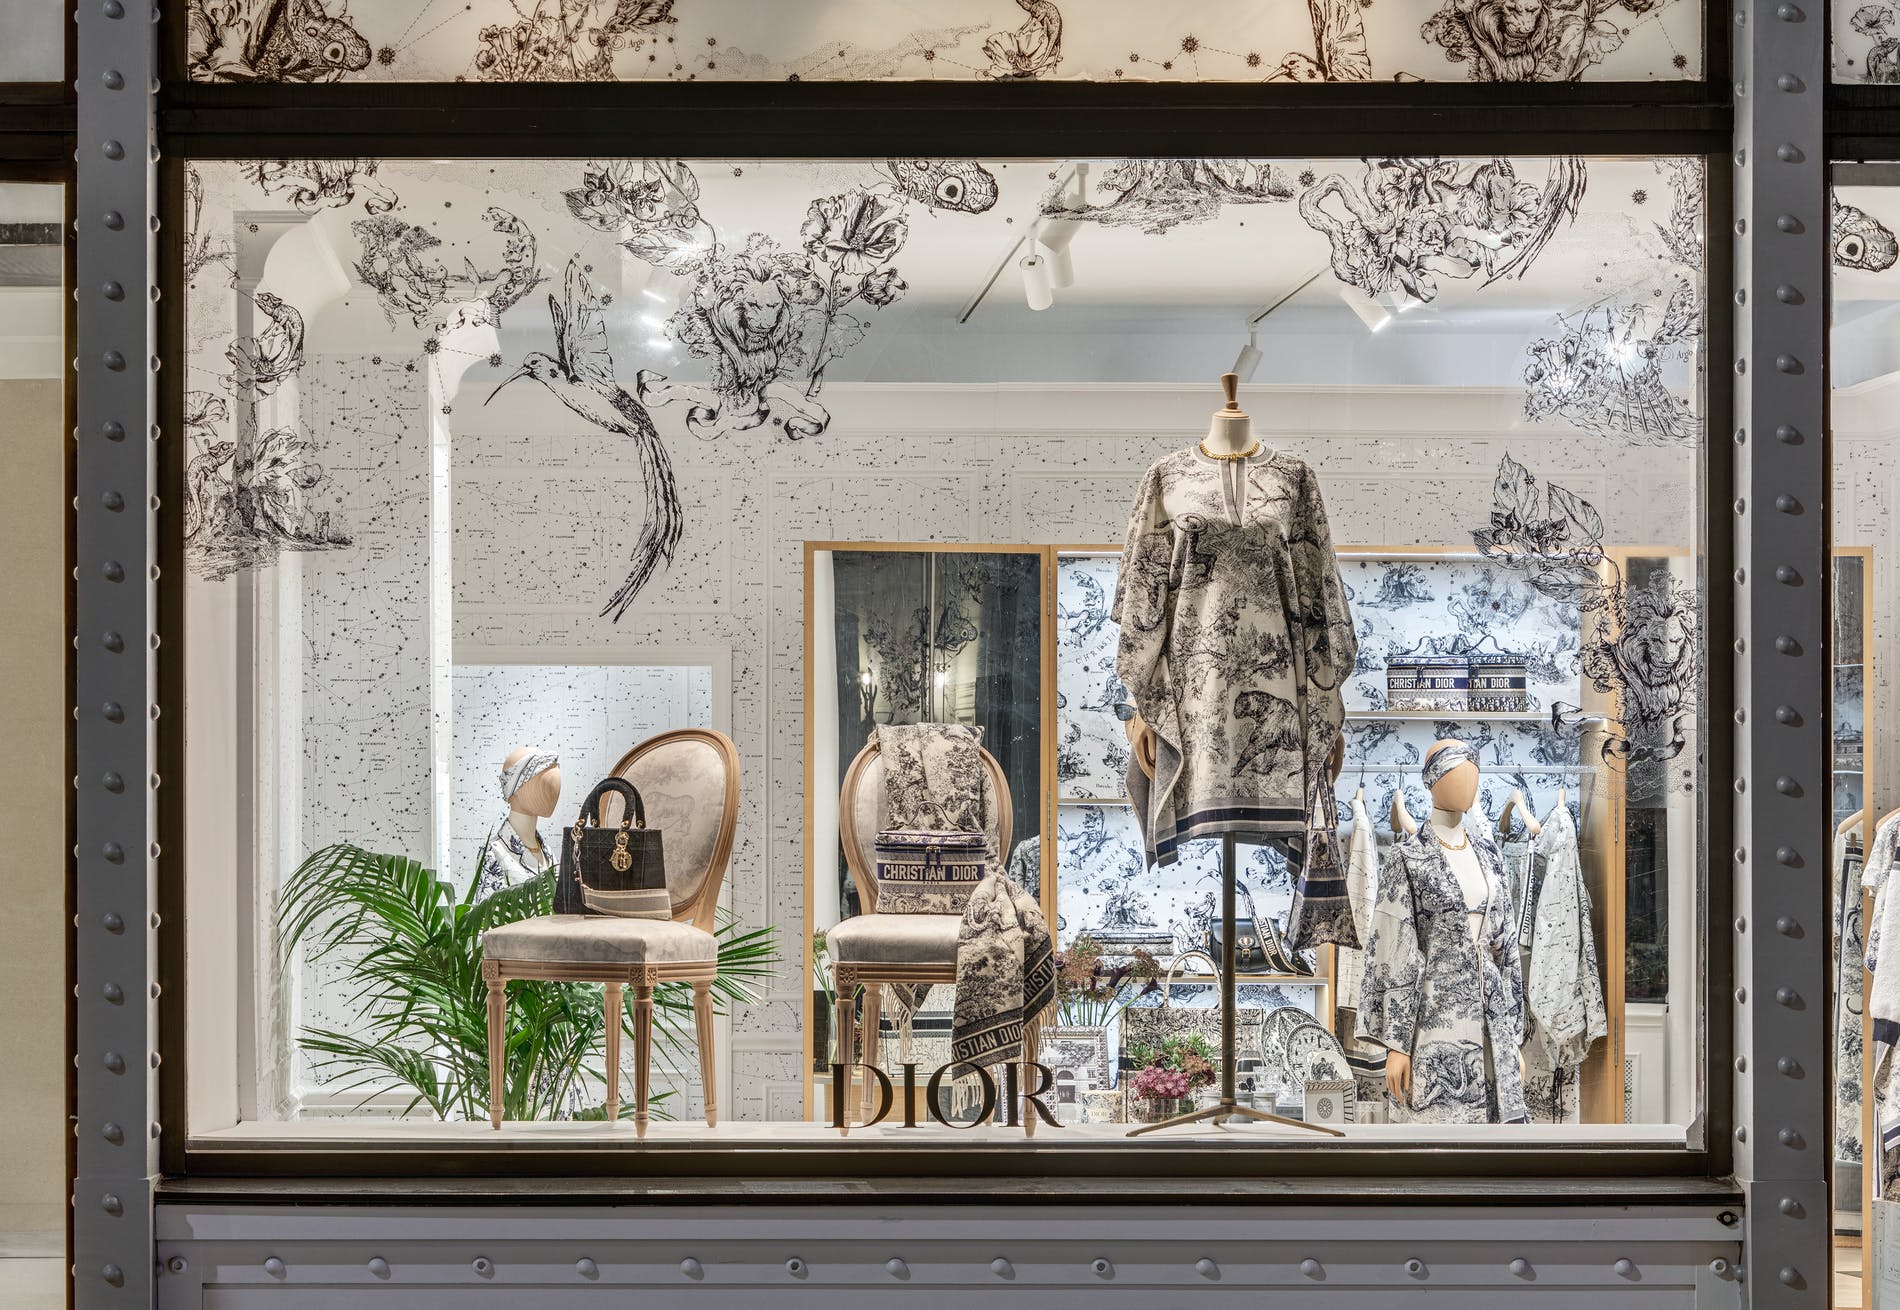 CHRISTIAN DIOR NEW SOHO BOUTIQUE IN NEW YORK